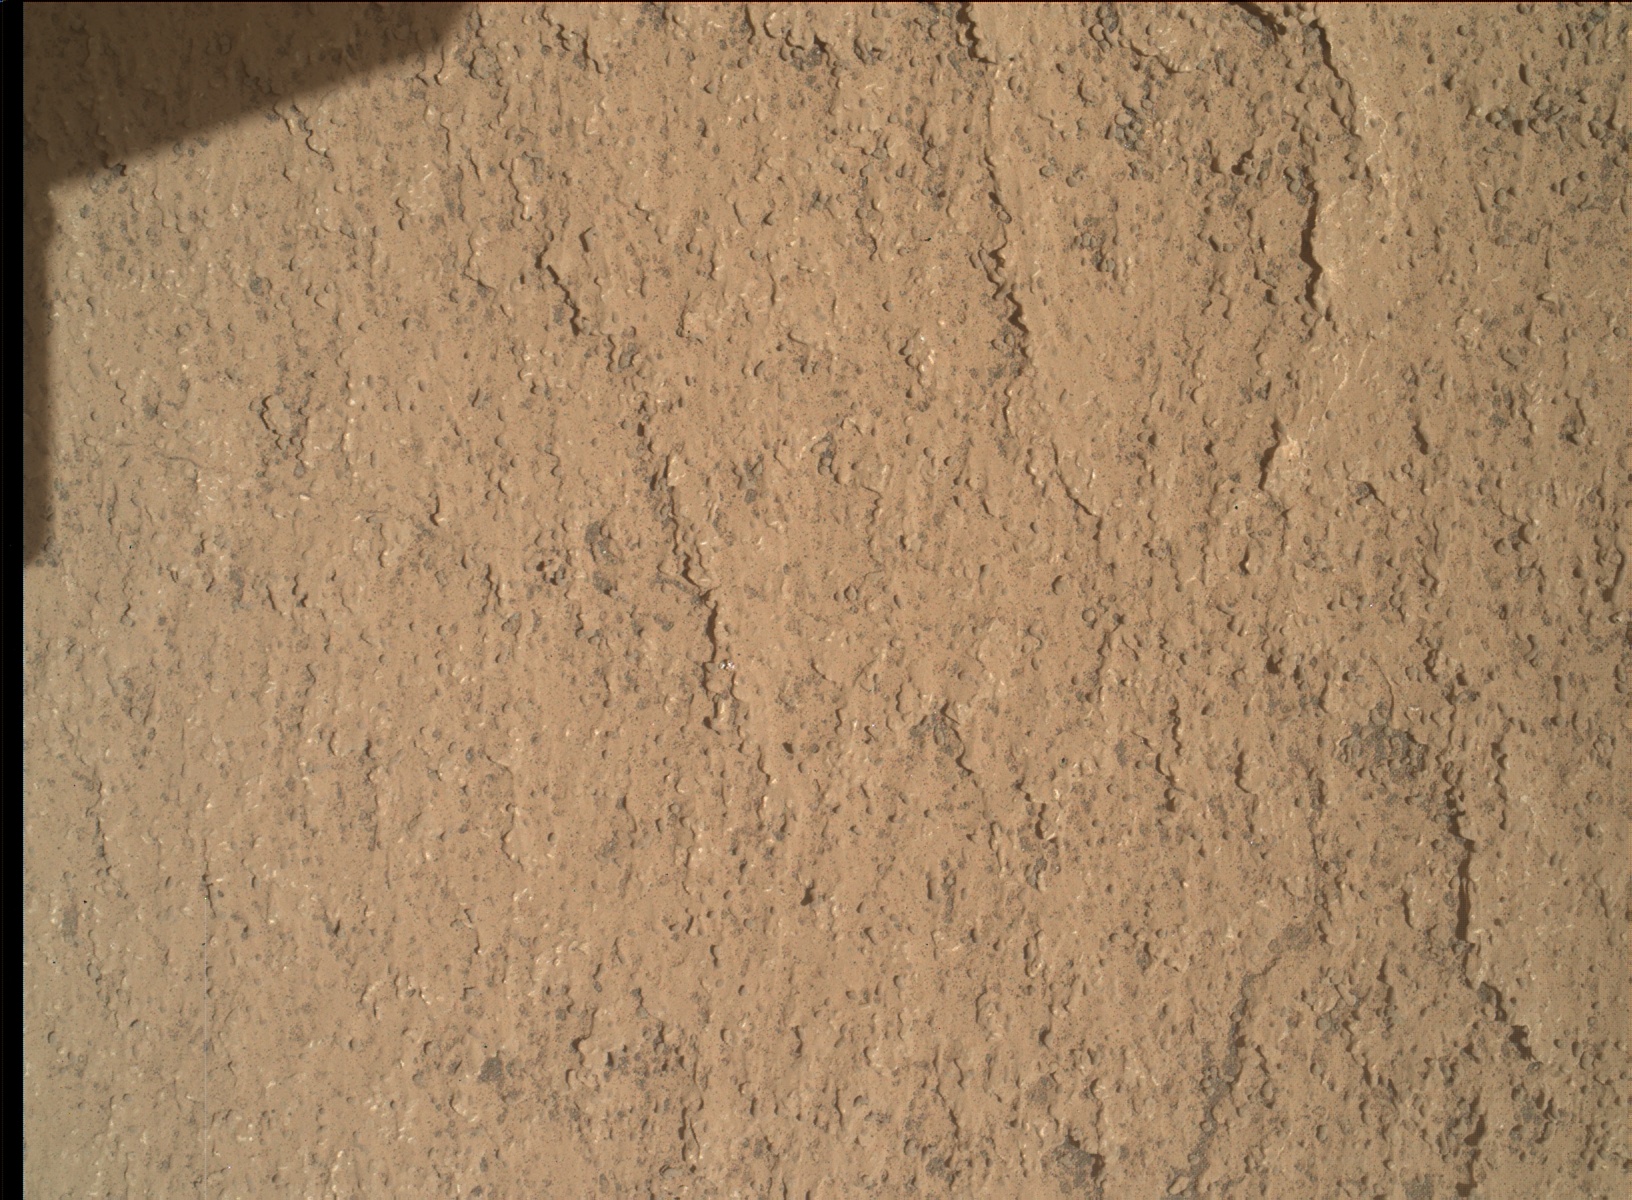 Nasa's Mars rover Curiosity acquired this image using its Mars Hand Lens Imager (MAHLI) on Sol 3229